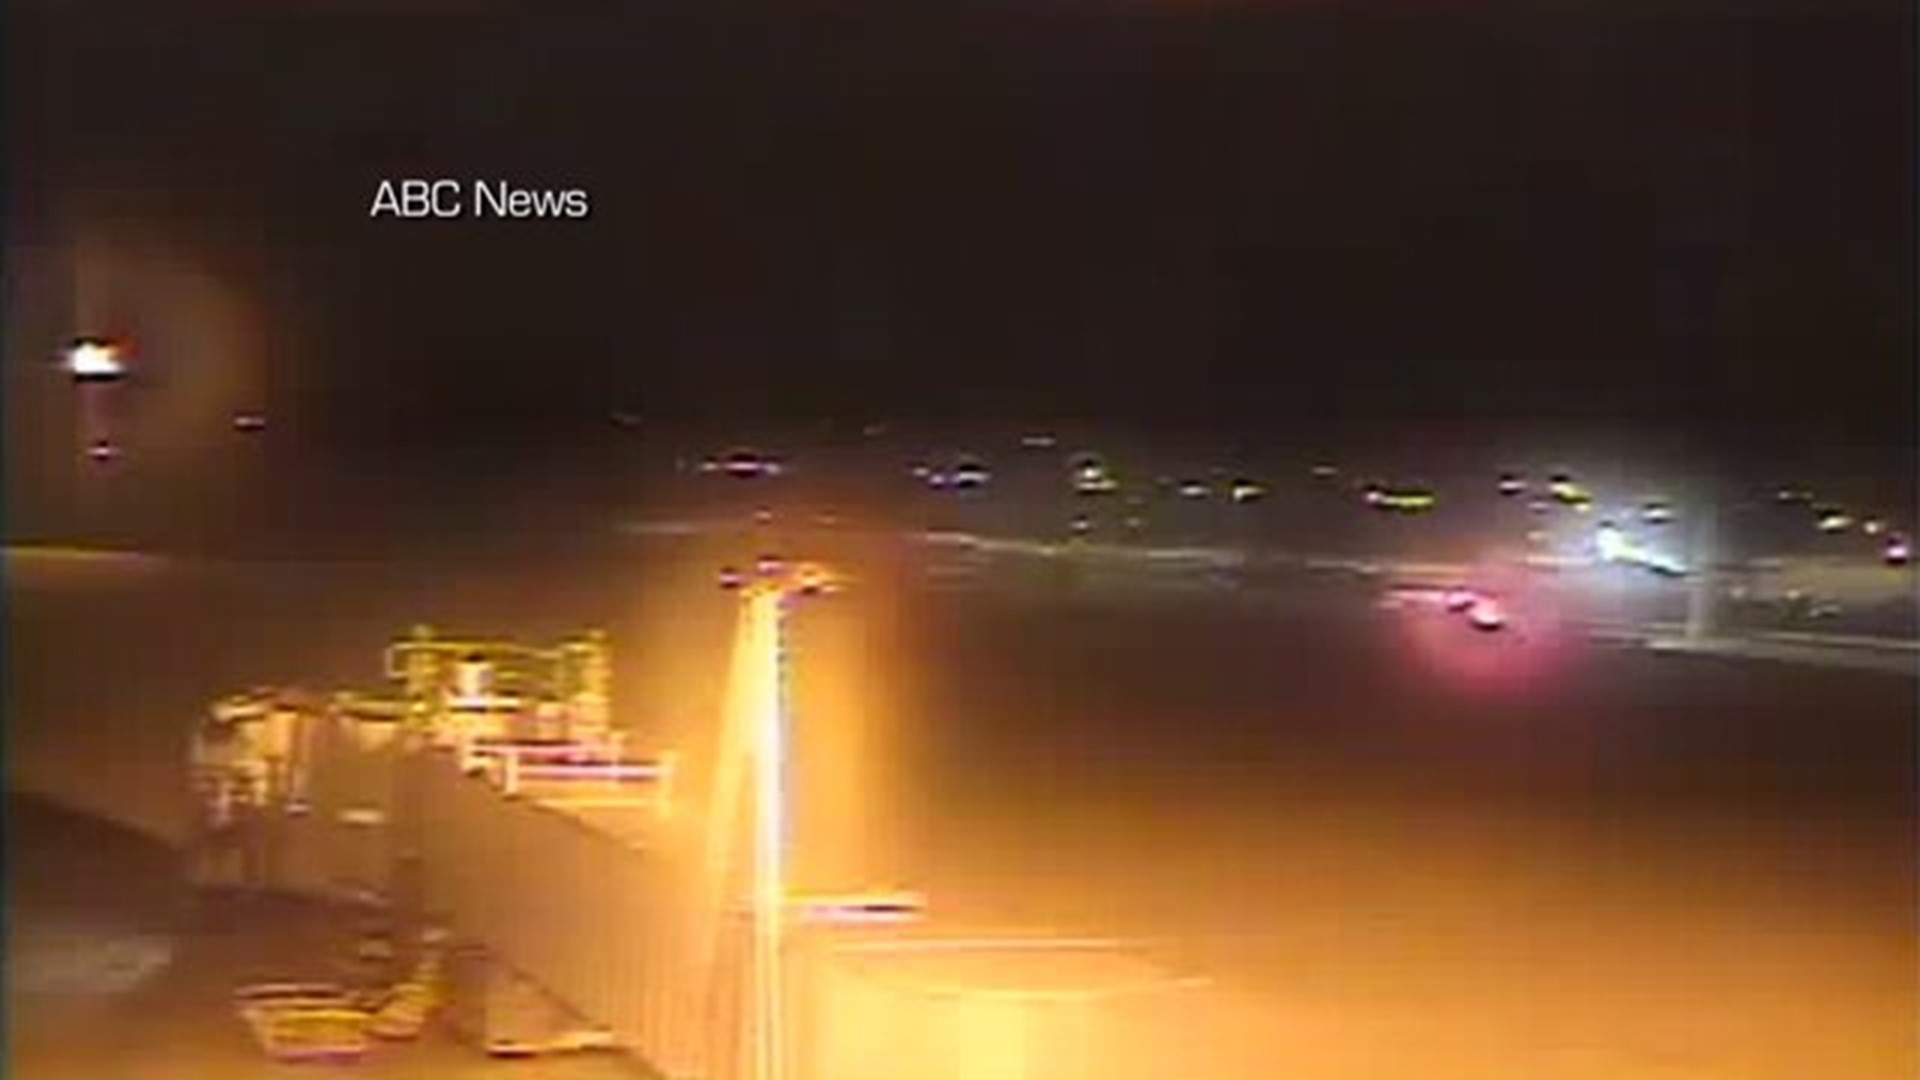 Prince`s private plane emergency landing at Quad City International Airport